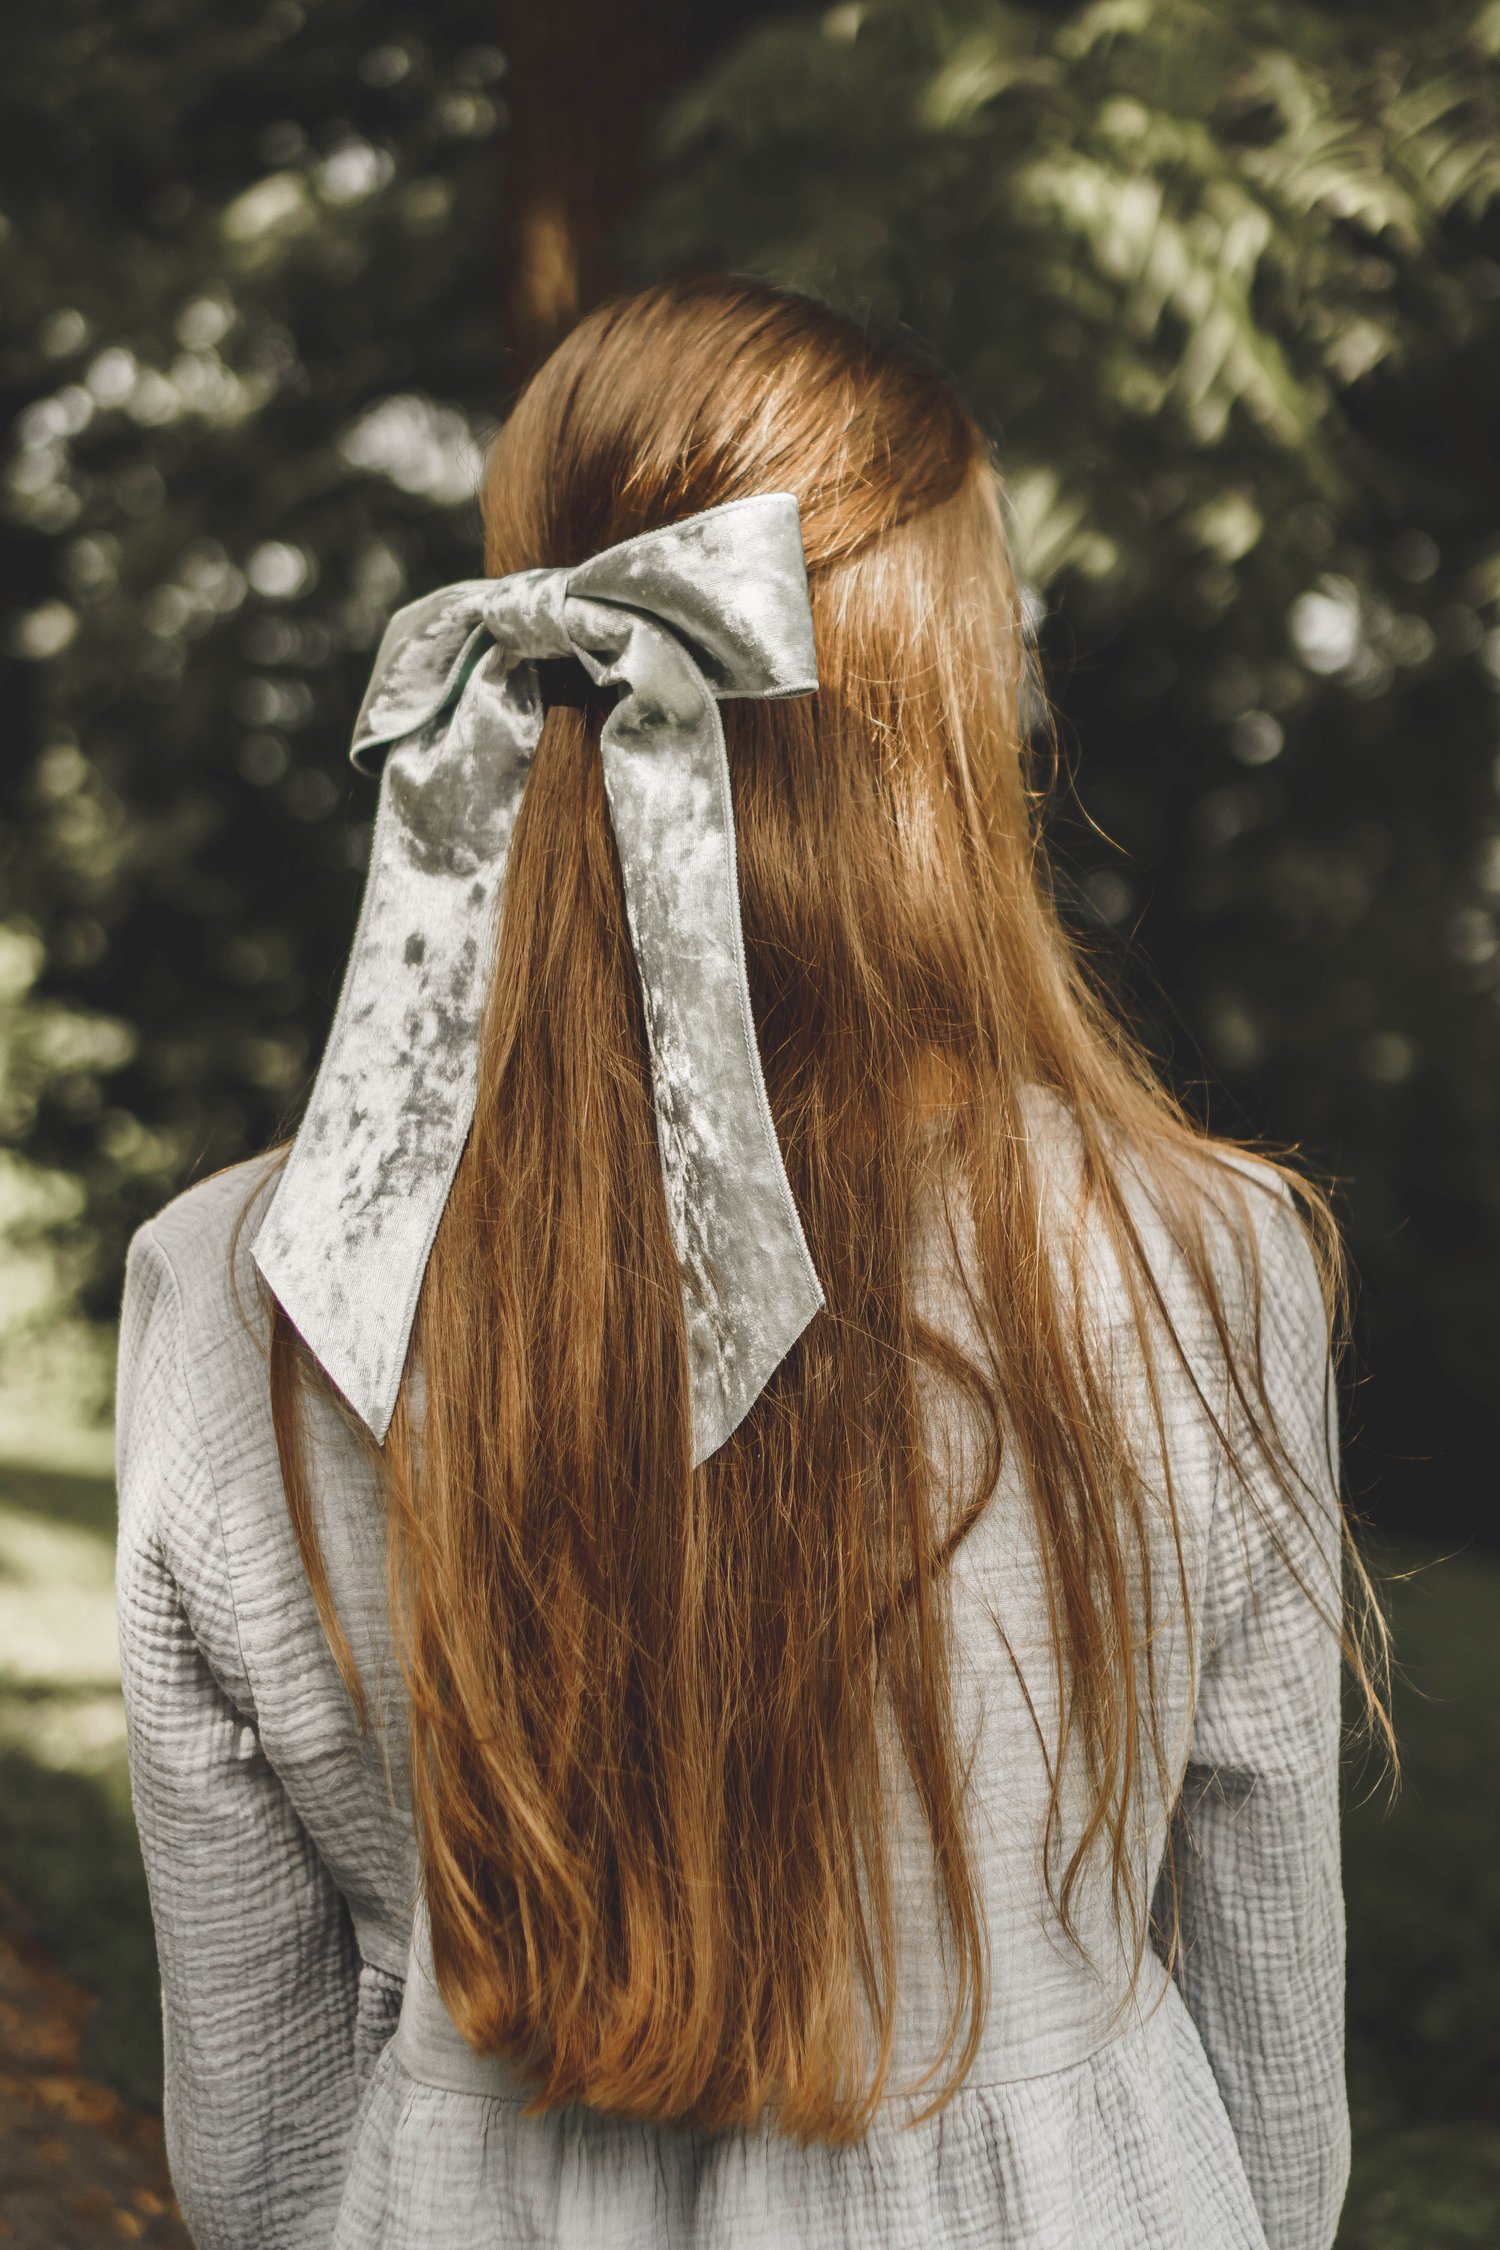 How to make hair bows : 10 easy ways to beautiful hairbow